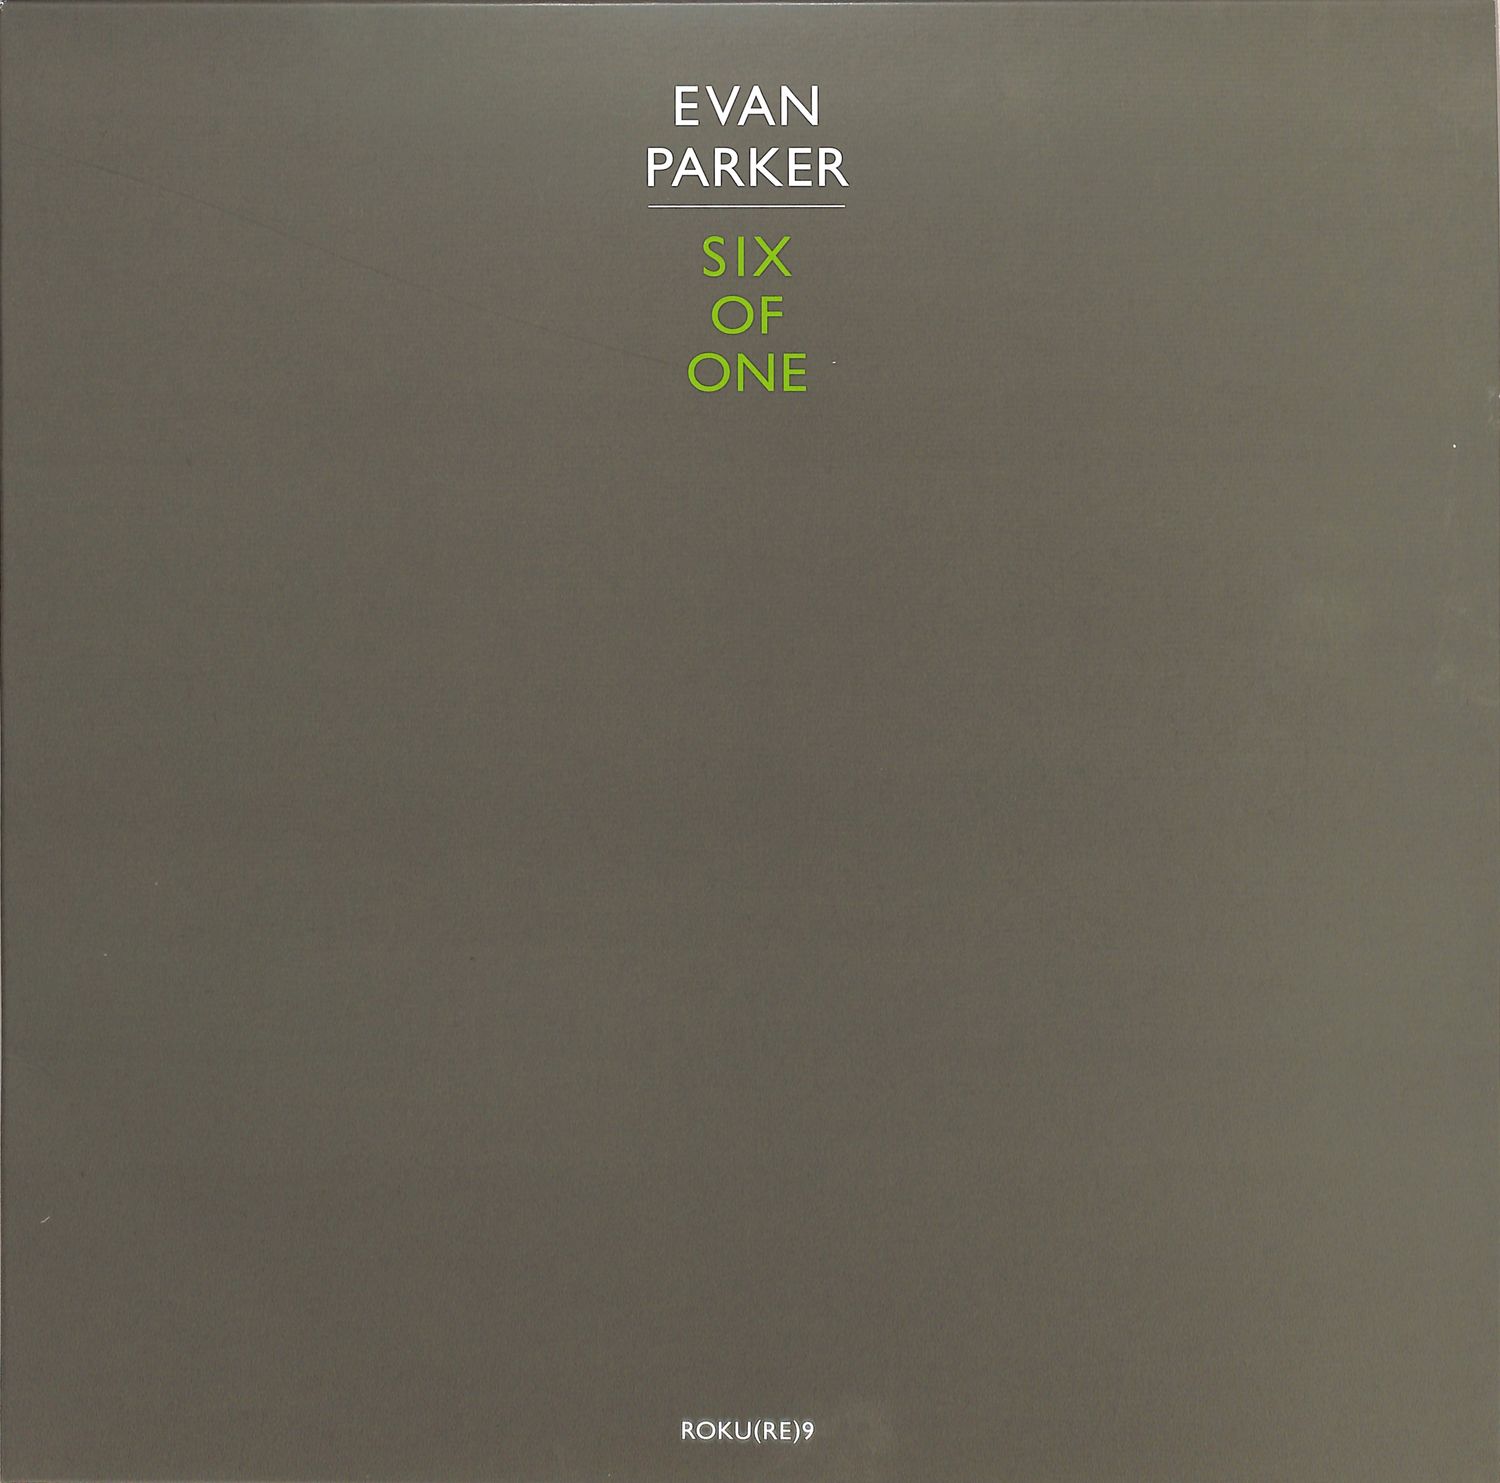 Evan Parker - SIX OF ONE 